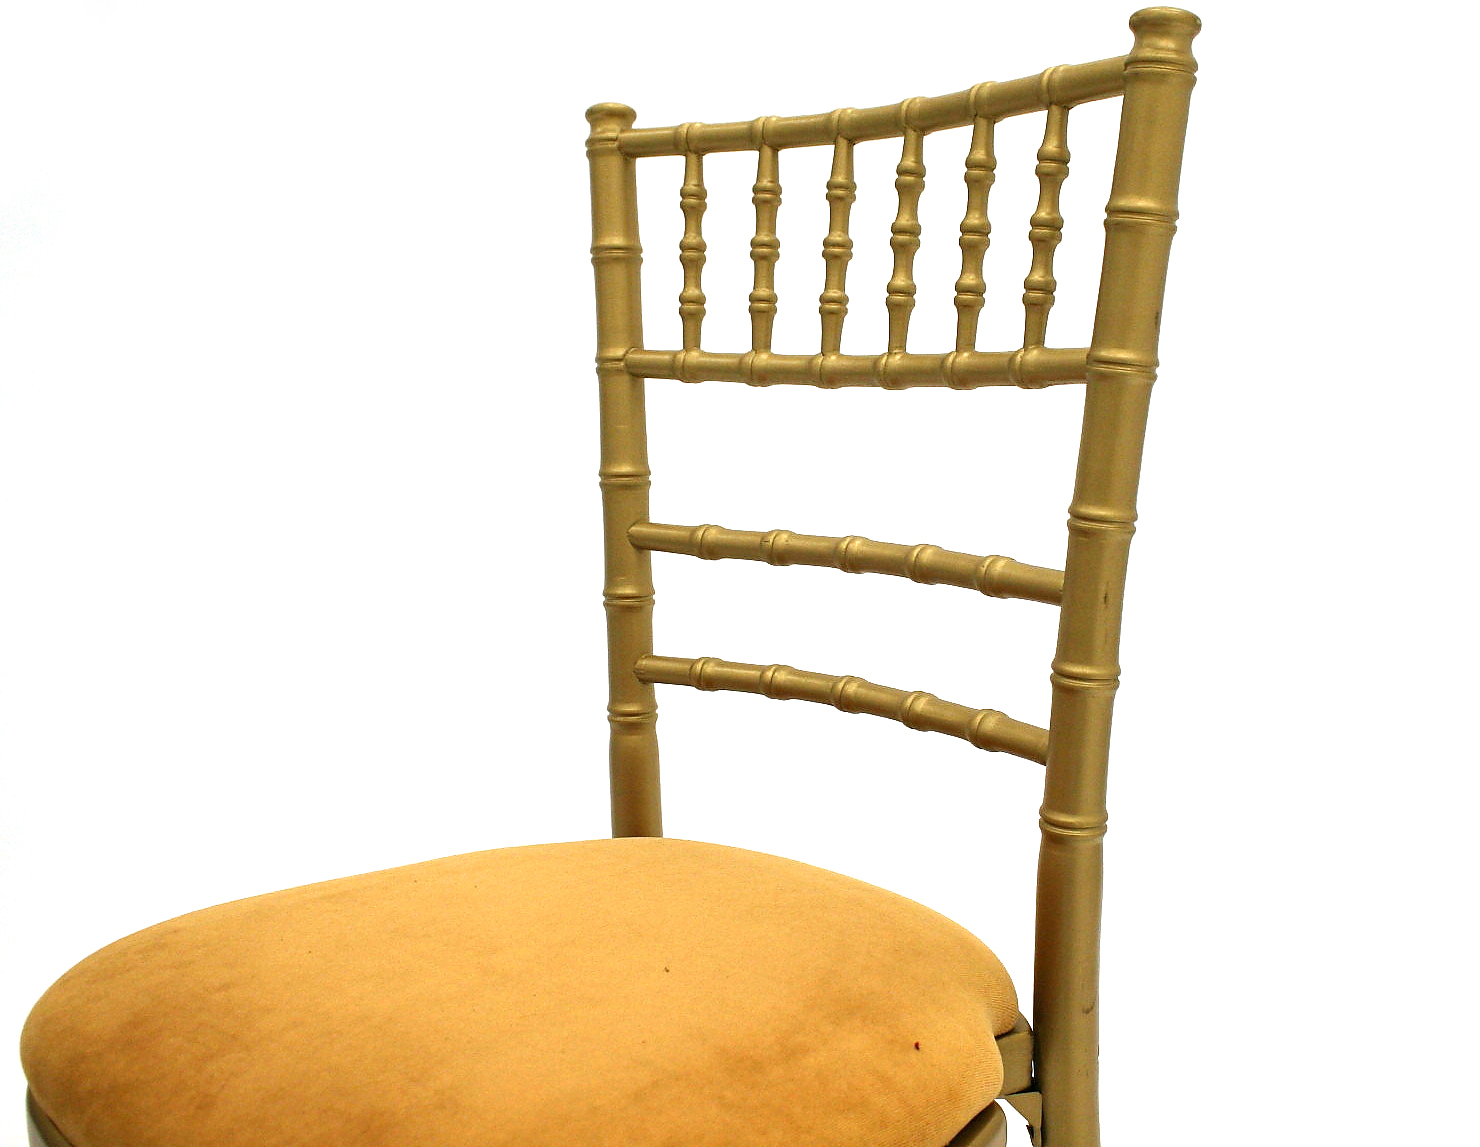 Our Chiavari chairs  wedding chair have a gold wooden frame with a choice of ivory, gold, green, blue or red seat pads - BE Event Hire